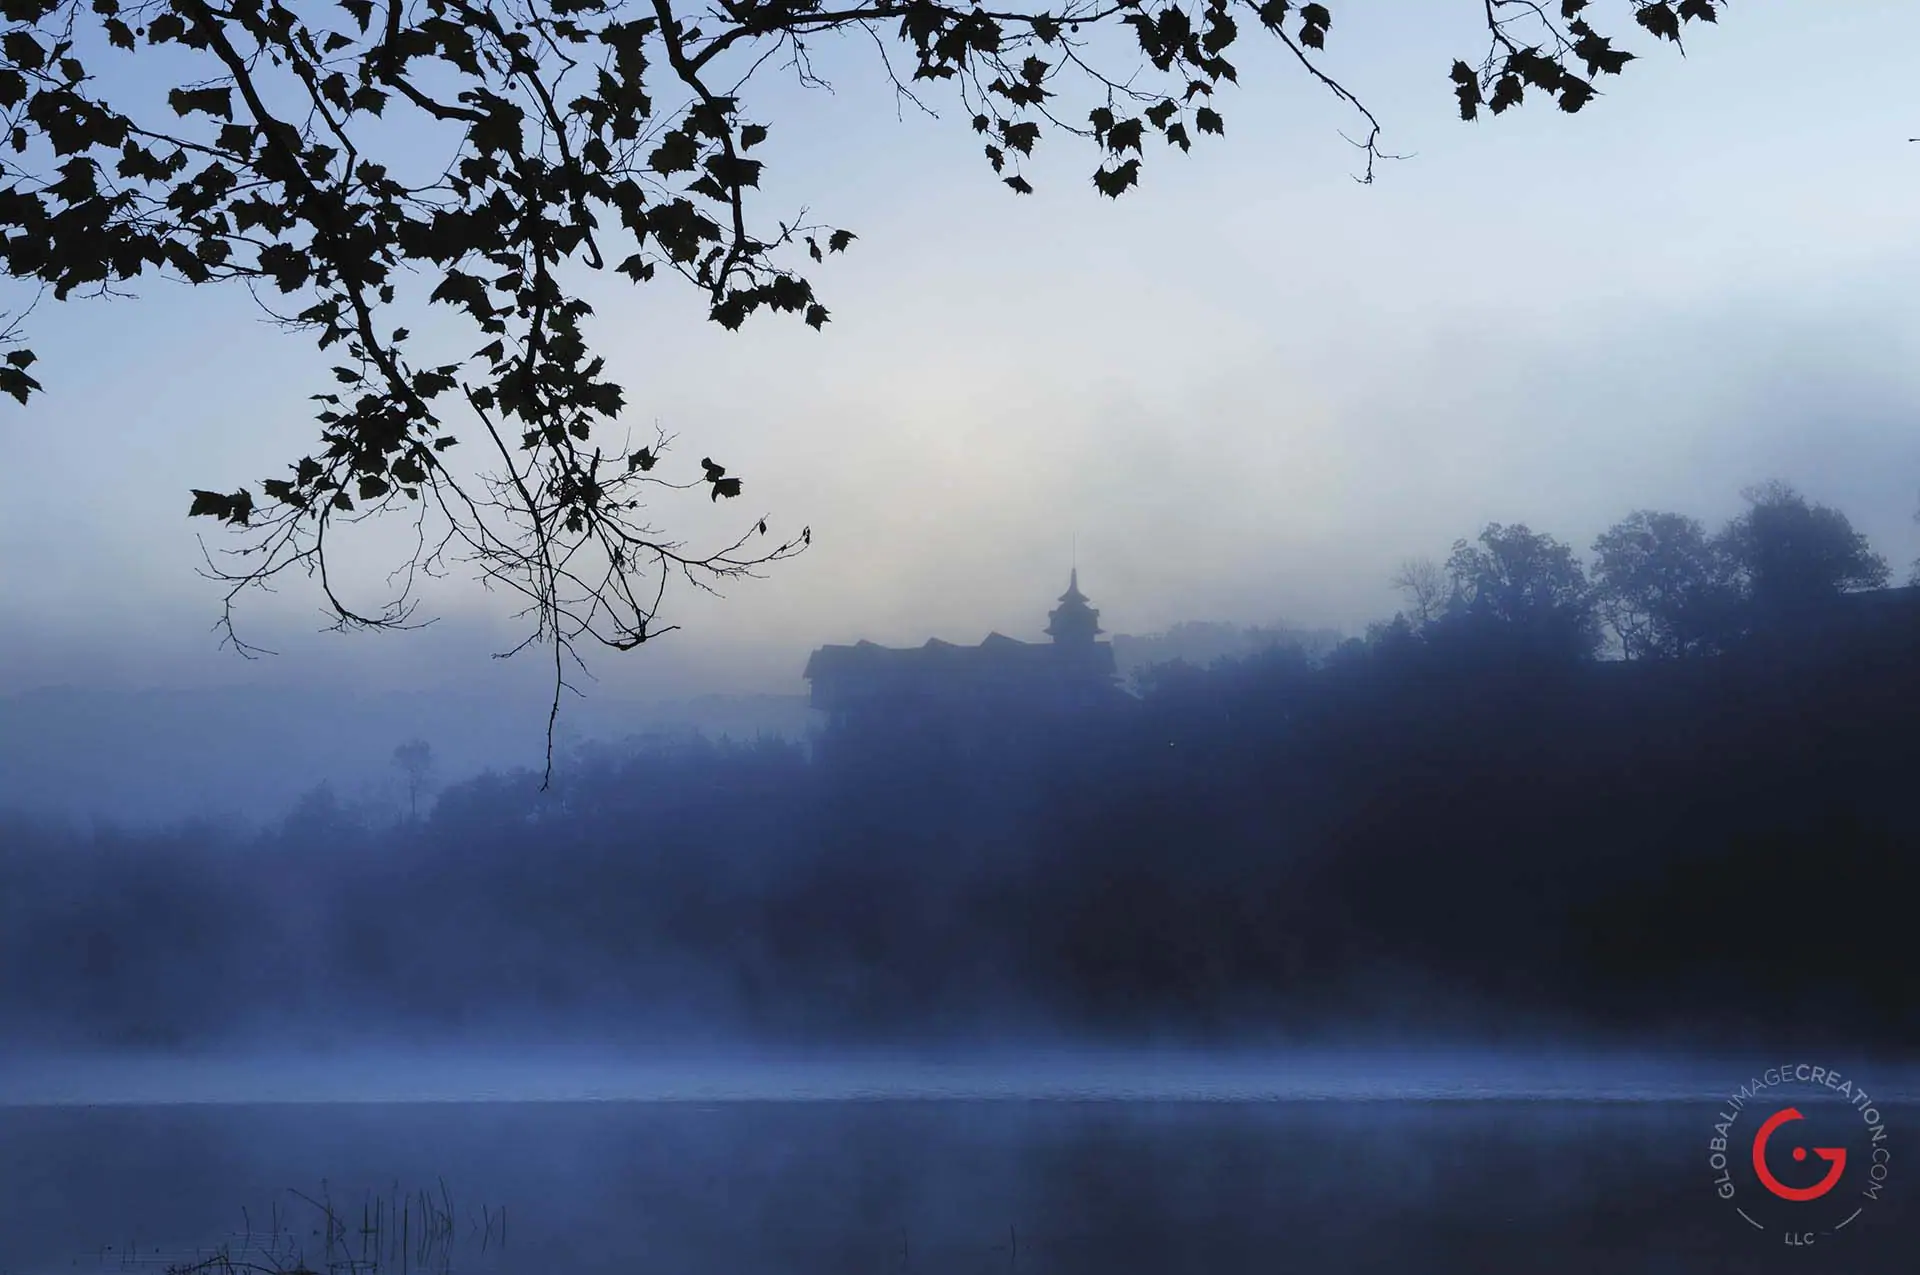 Castle Rogues Manor and the White River in the Fog - Eureka Springs, Arkansas